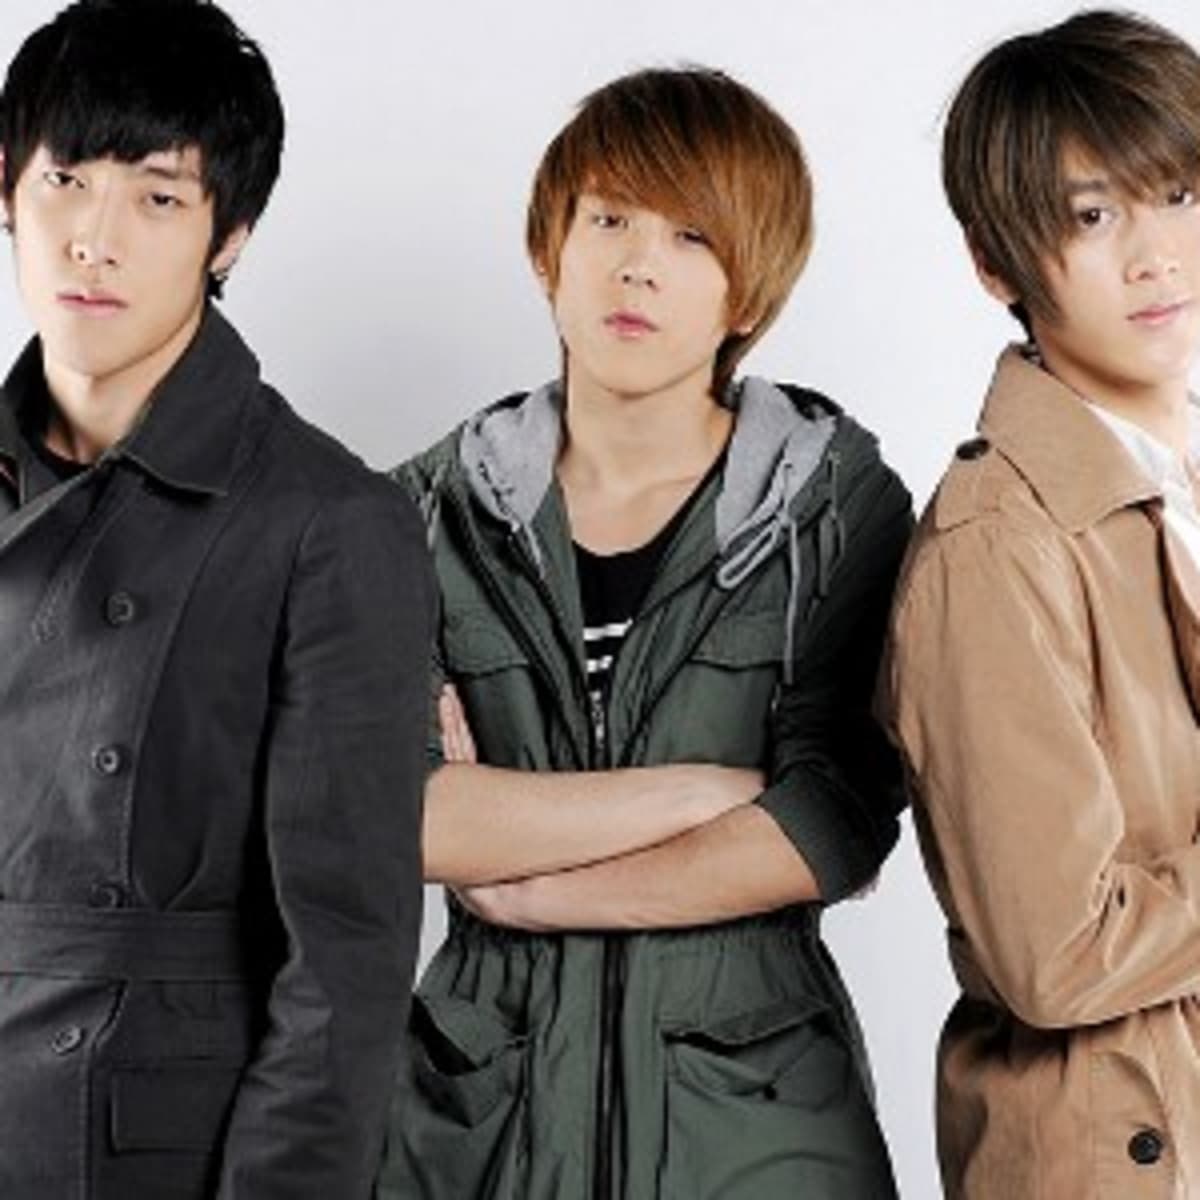 10 Chinese Boy Bands Worth Checking Out - Spinditty